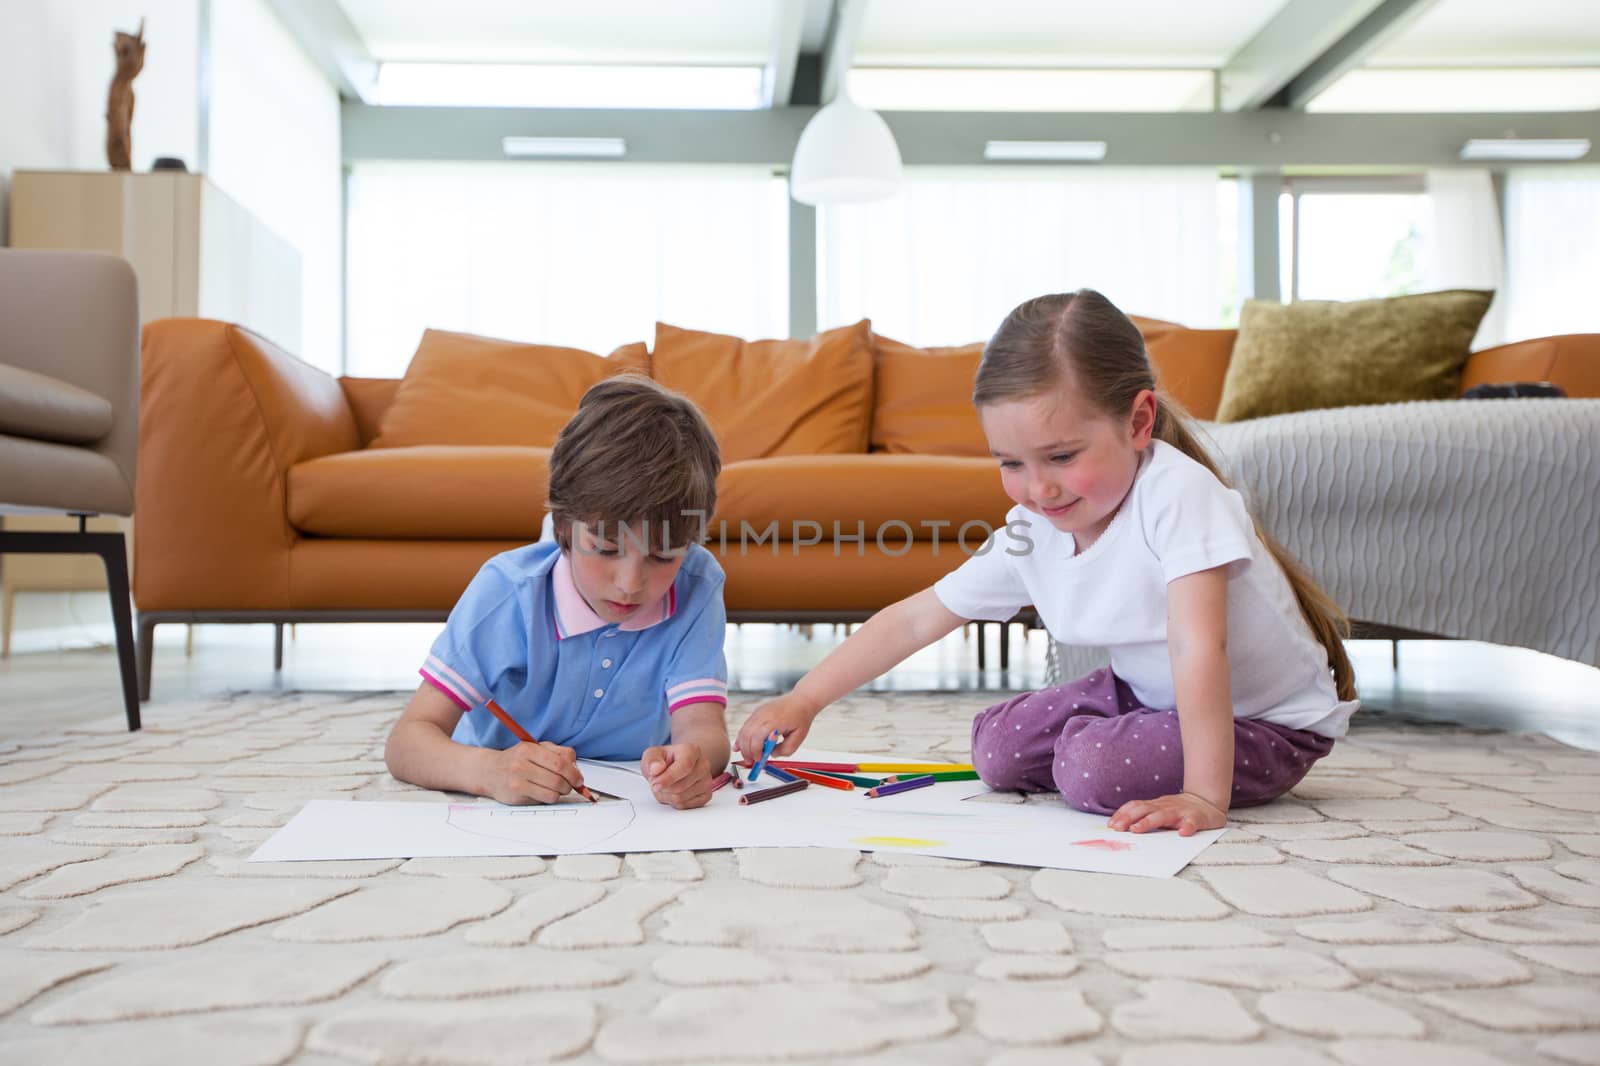 Little boy and girl drawing with color pencils on the floor playing together